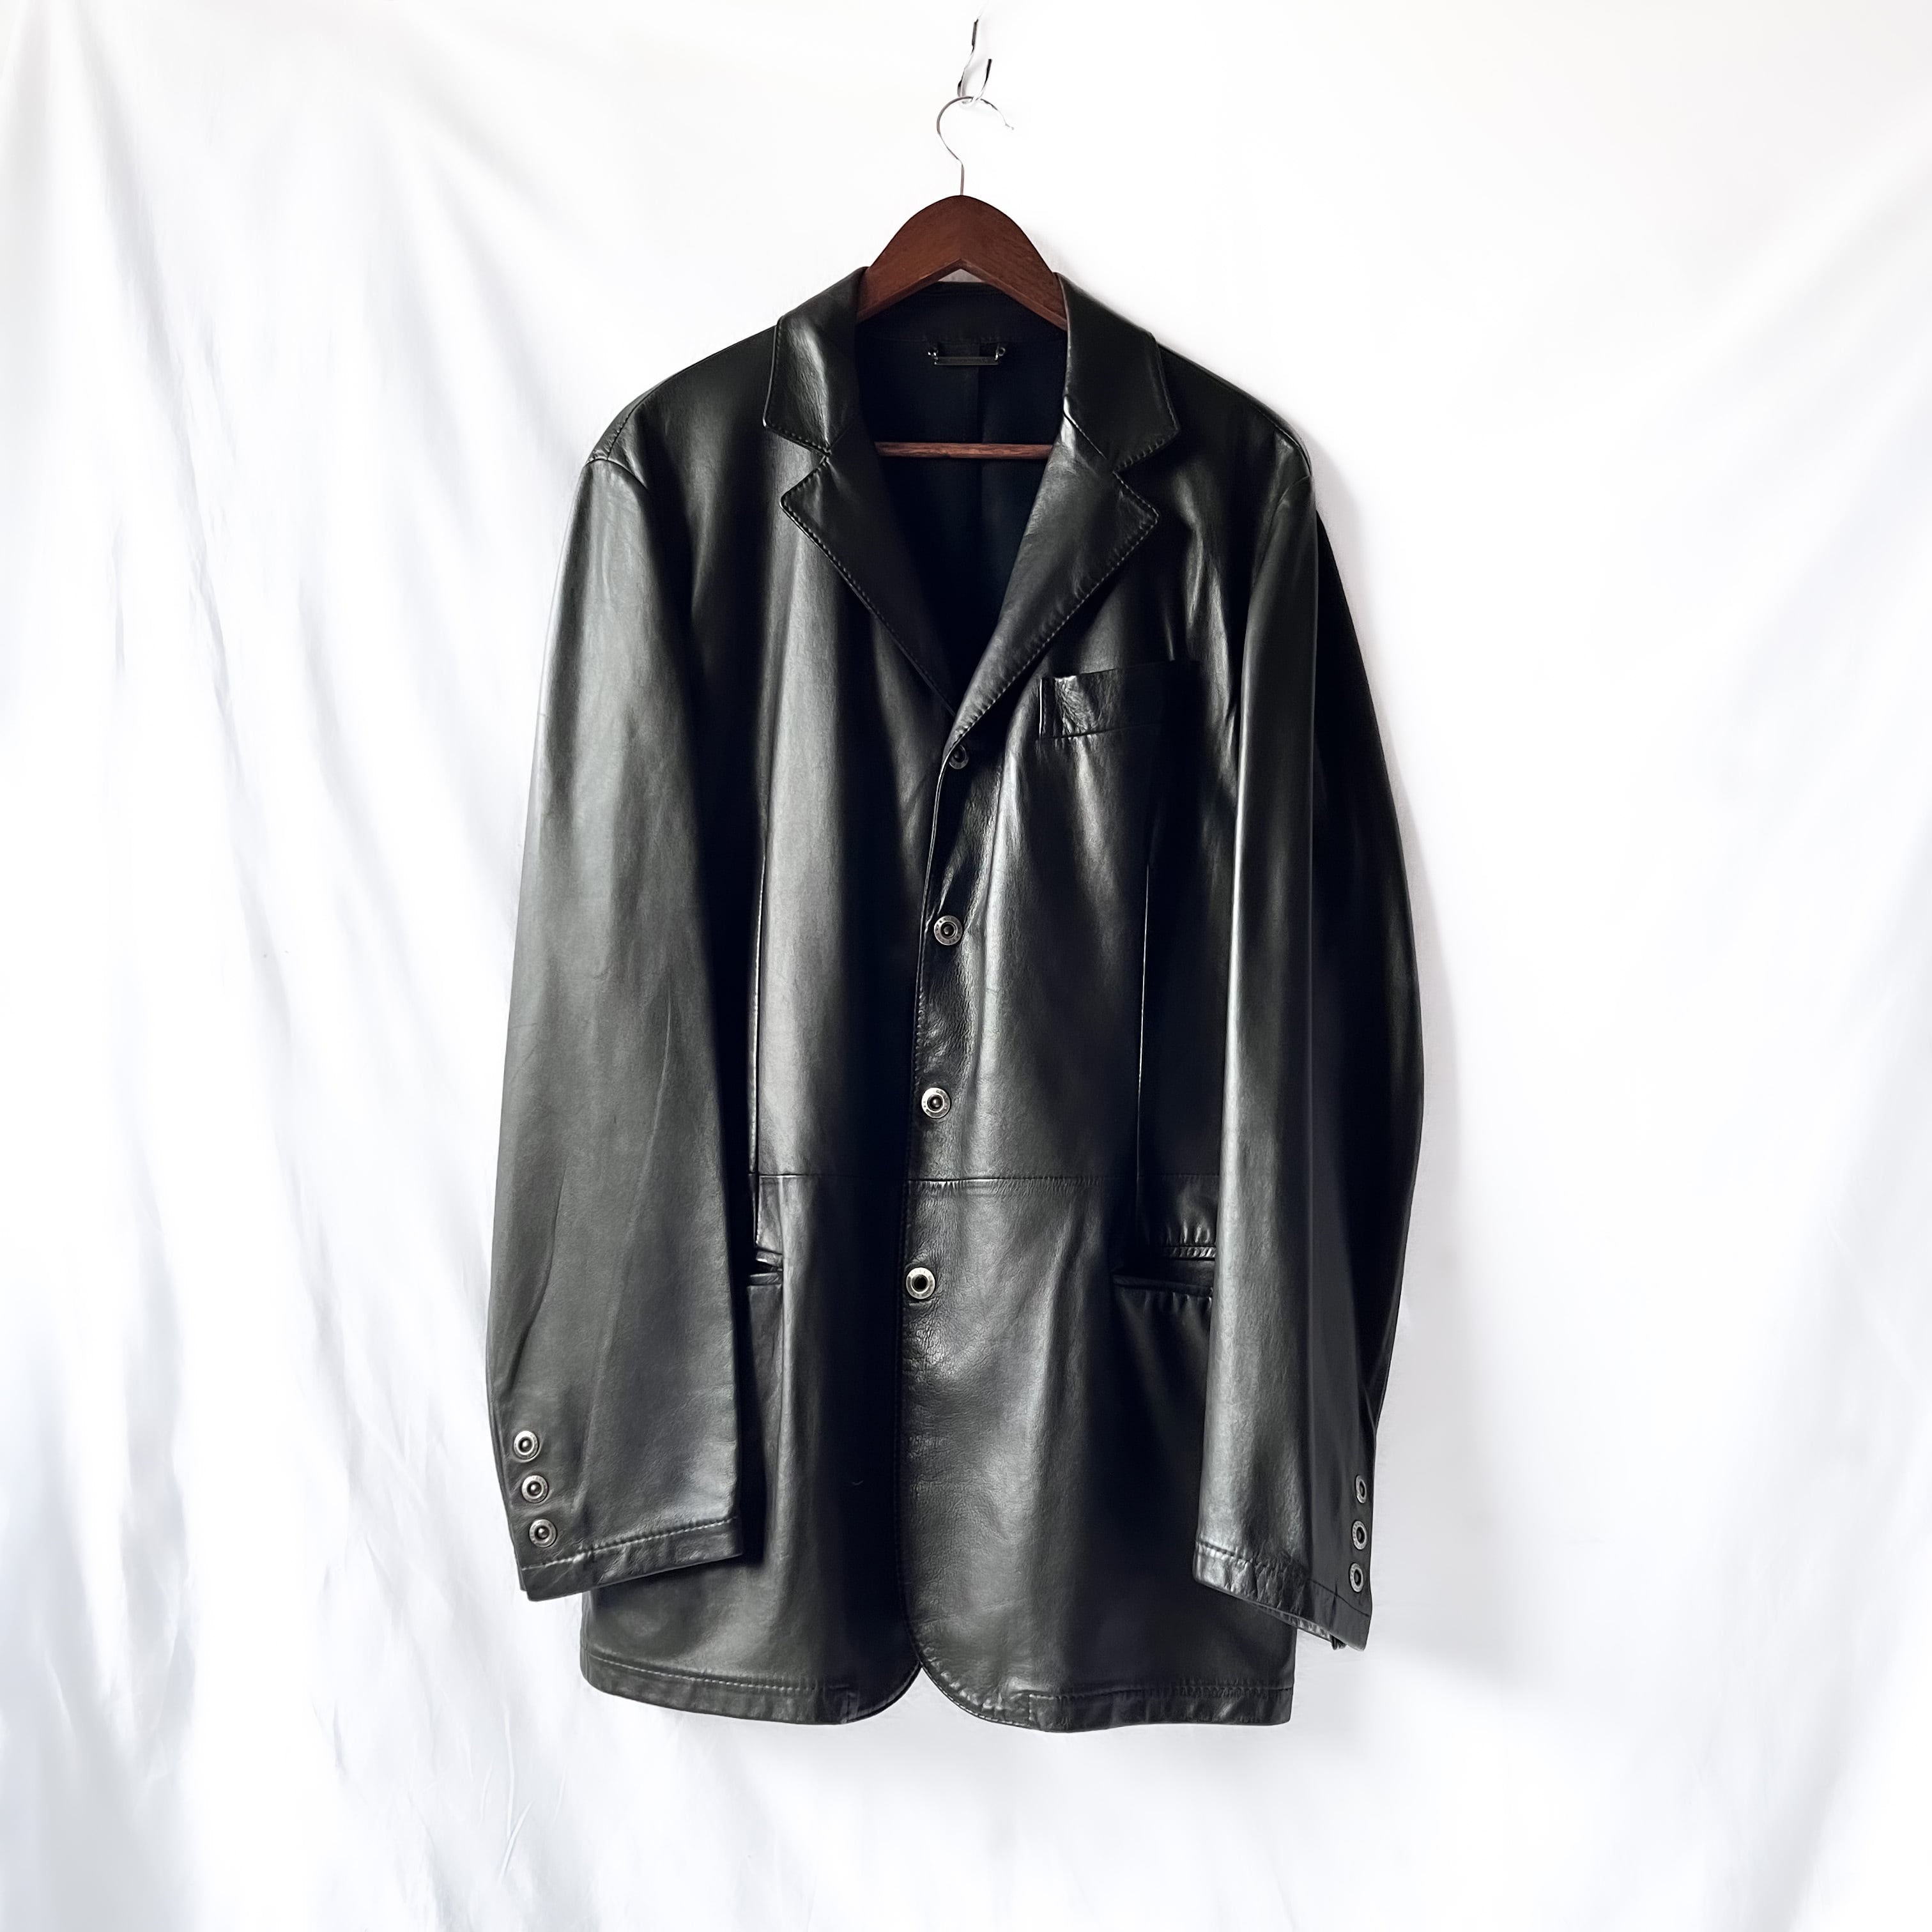 90s “GIANFRANCO FERRE” sheep leather jacket made in italy ...